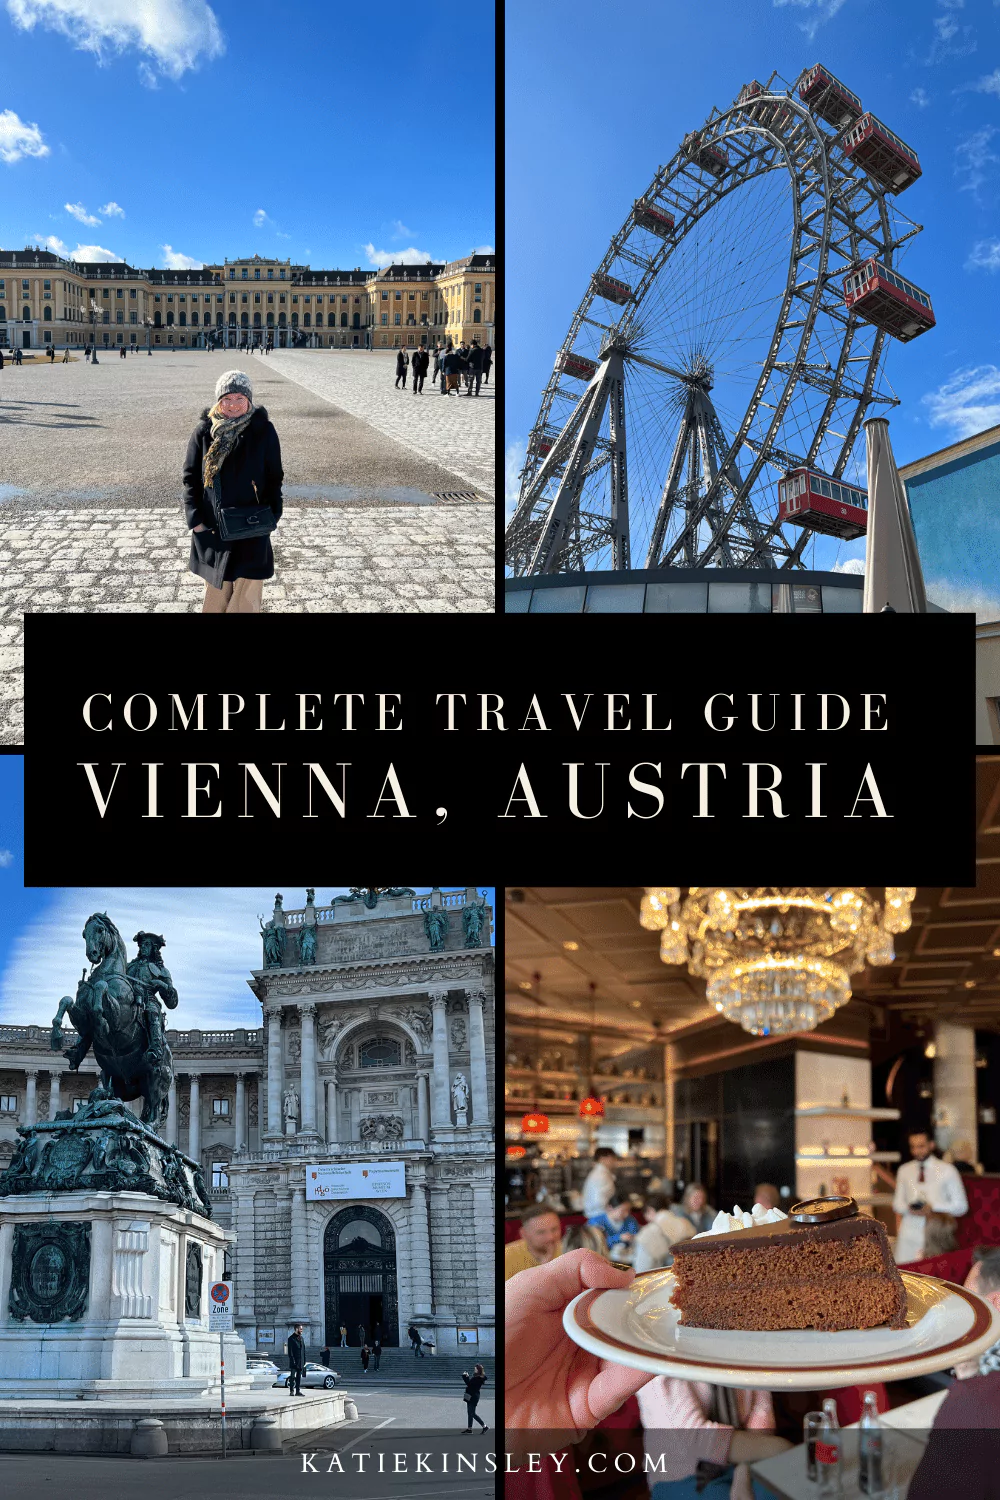 How To See Vienna In One Day From Salzburg: The Ultimate Guide